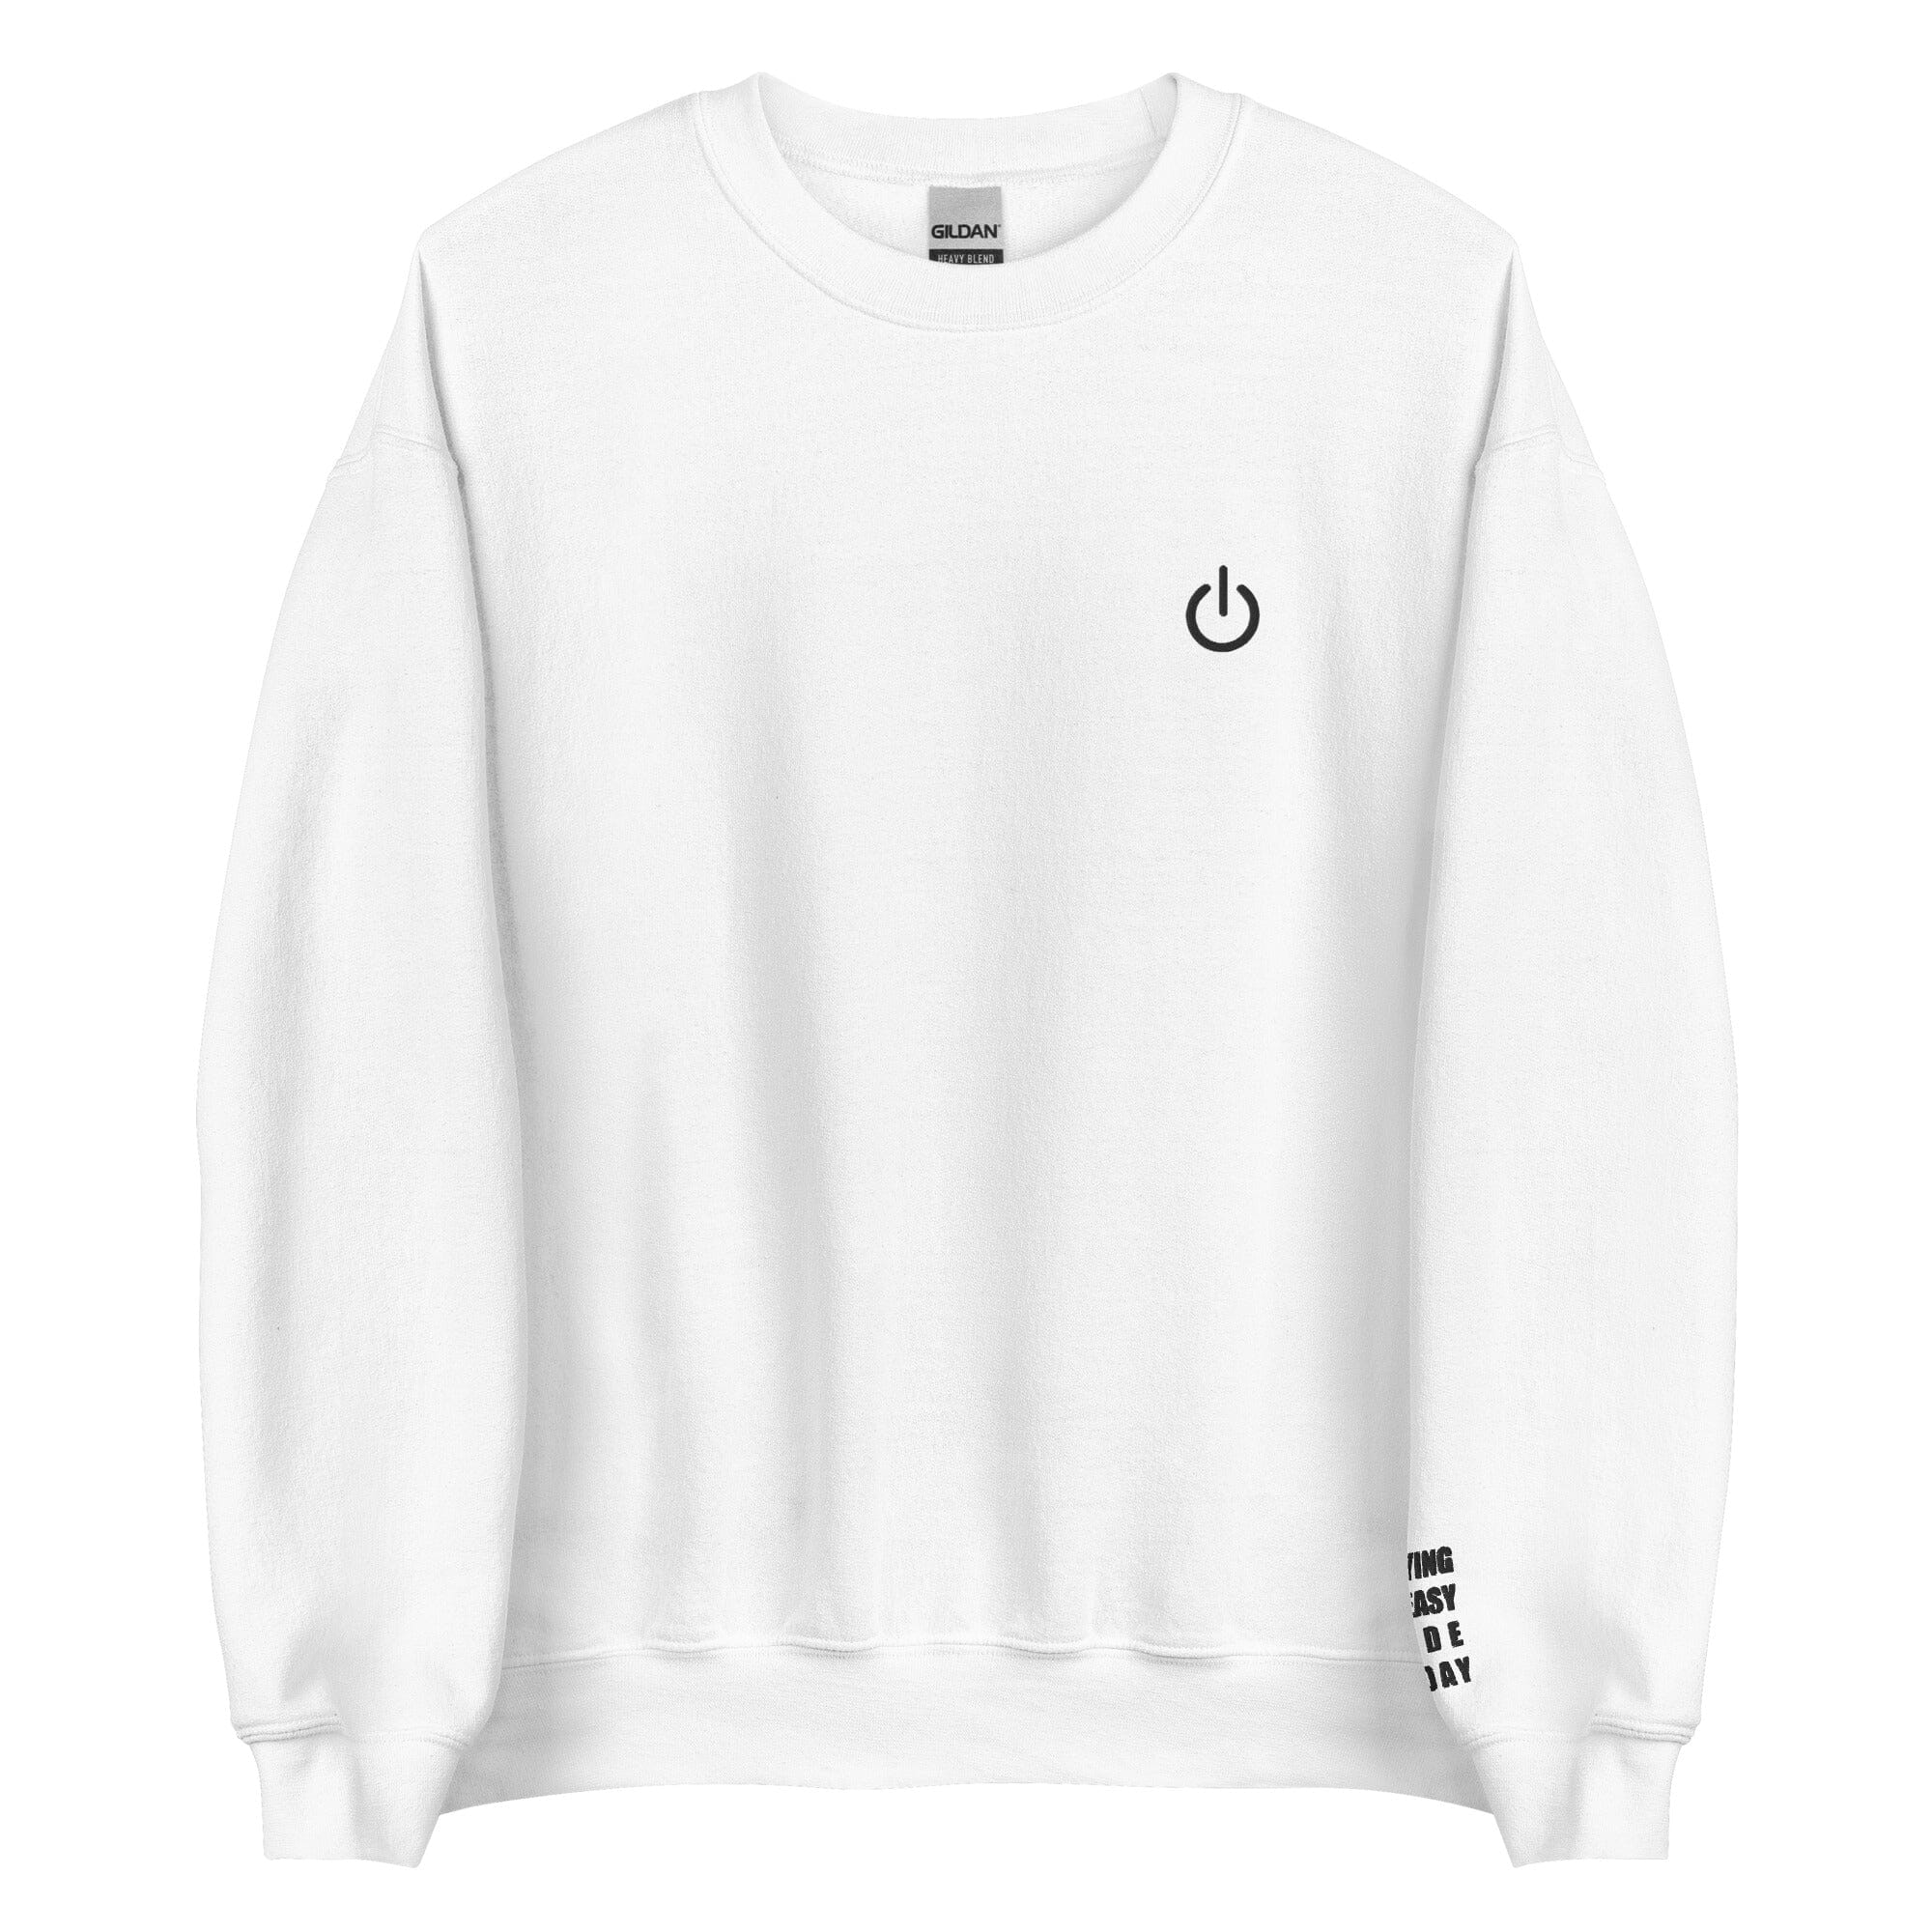 Playing on Easy Mode Today | Unisex Sweatshirt | Gamer Affirmations Threads & Thistles Inventory White S 